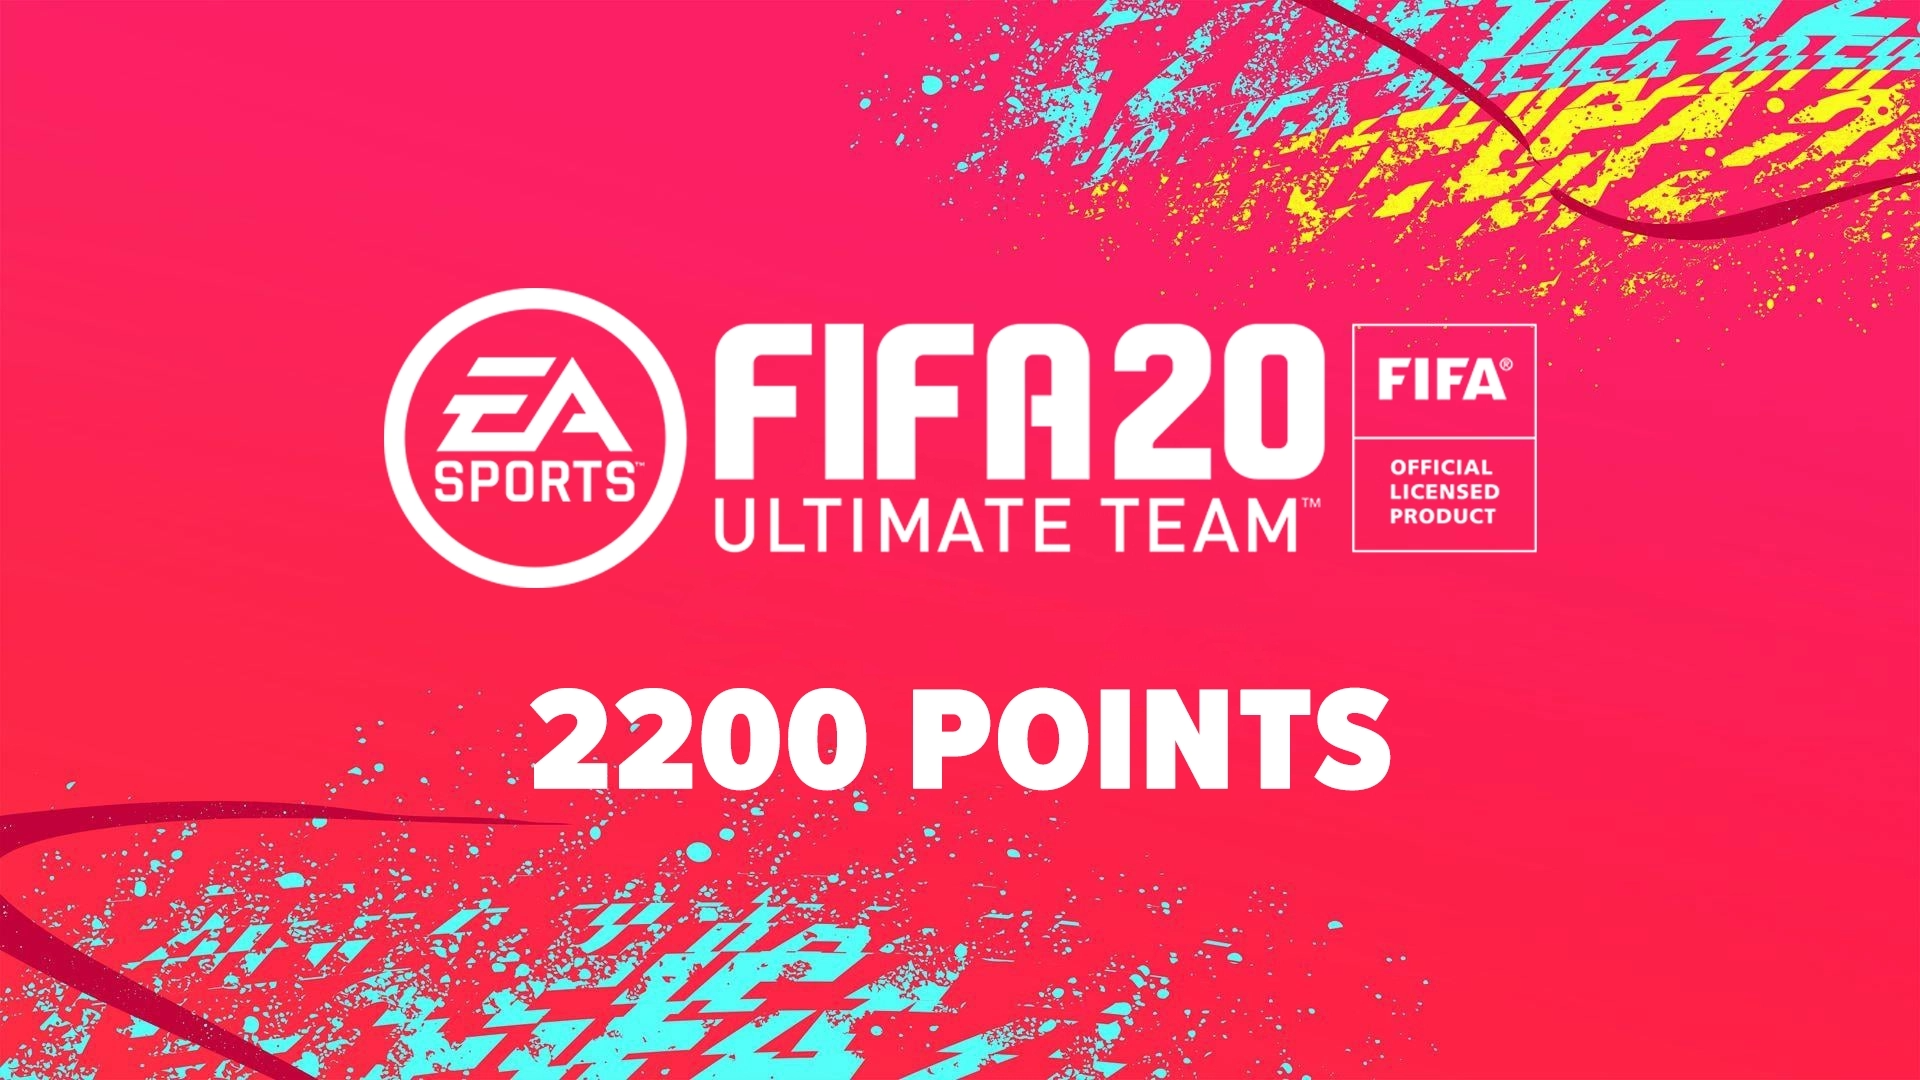 FIFA 20 ULTIMATE TEAM 2200 POINTS - Xbox One